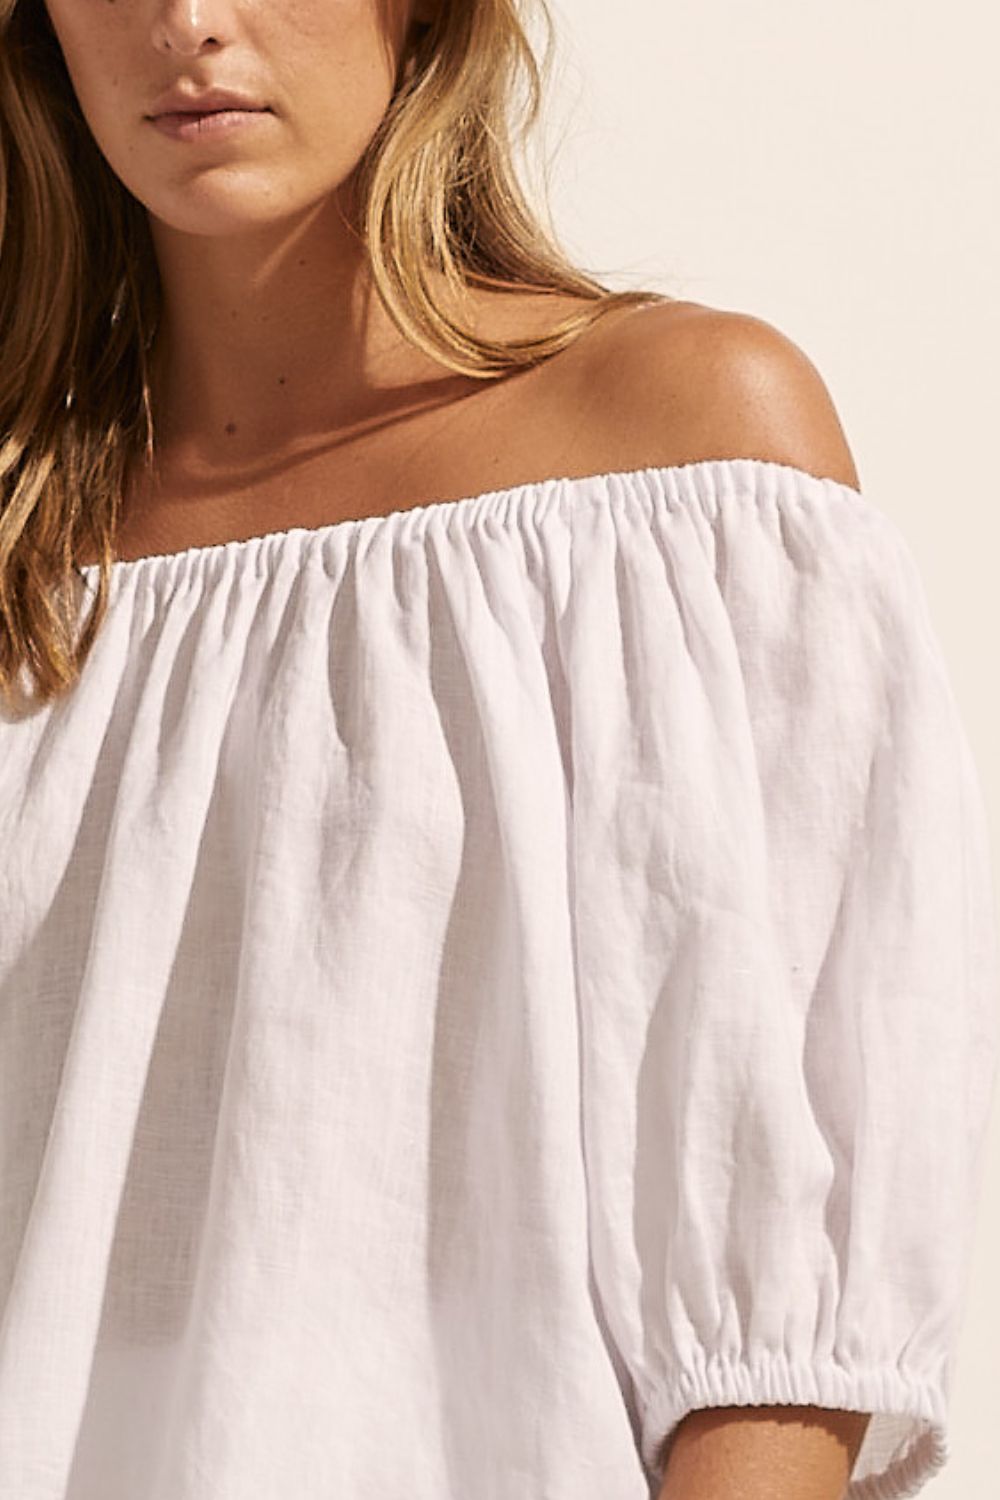 white, top, off-the-shoulder, mid-length sleeve, small side splits, elasticated sleeve cuff, tie at back, close up image